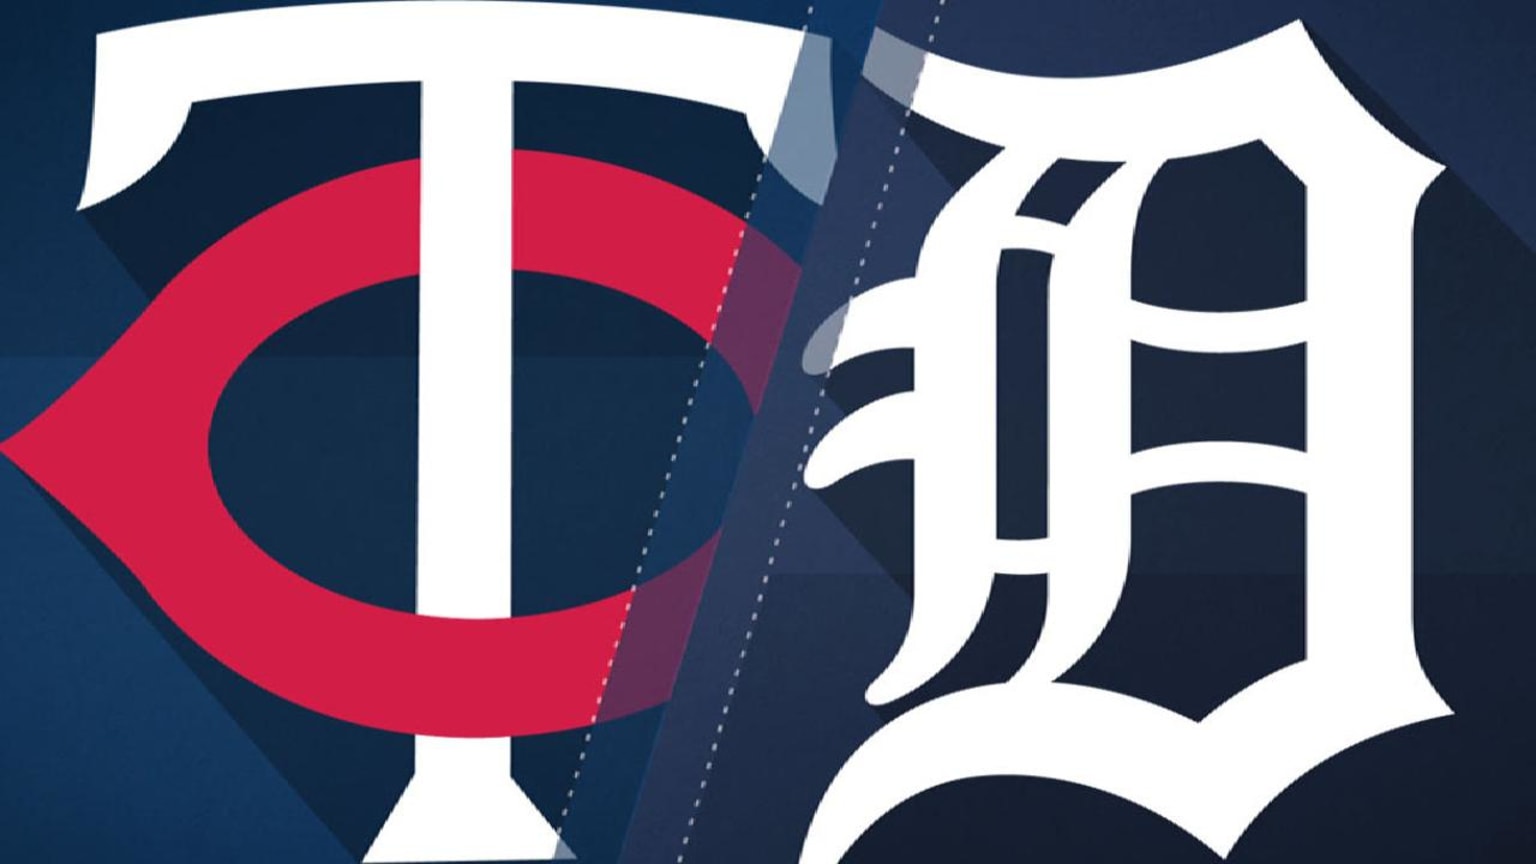 Game 17 Preview: Cleveland Indians at Detroit Tigers - Bless You Boys